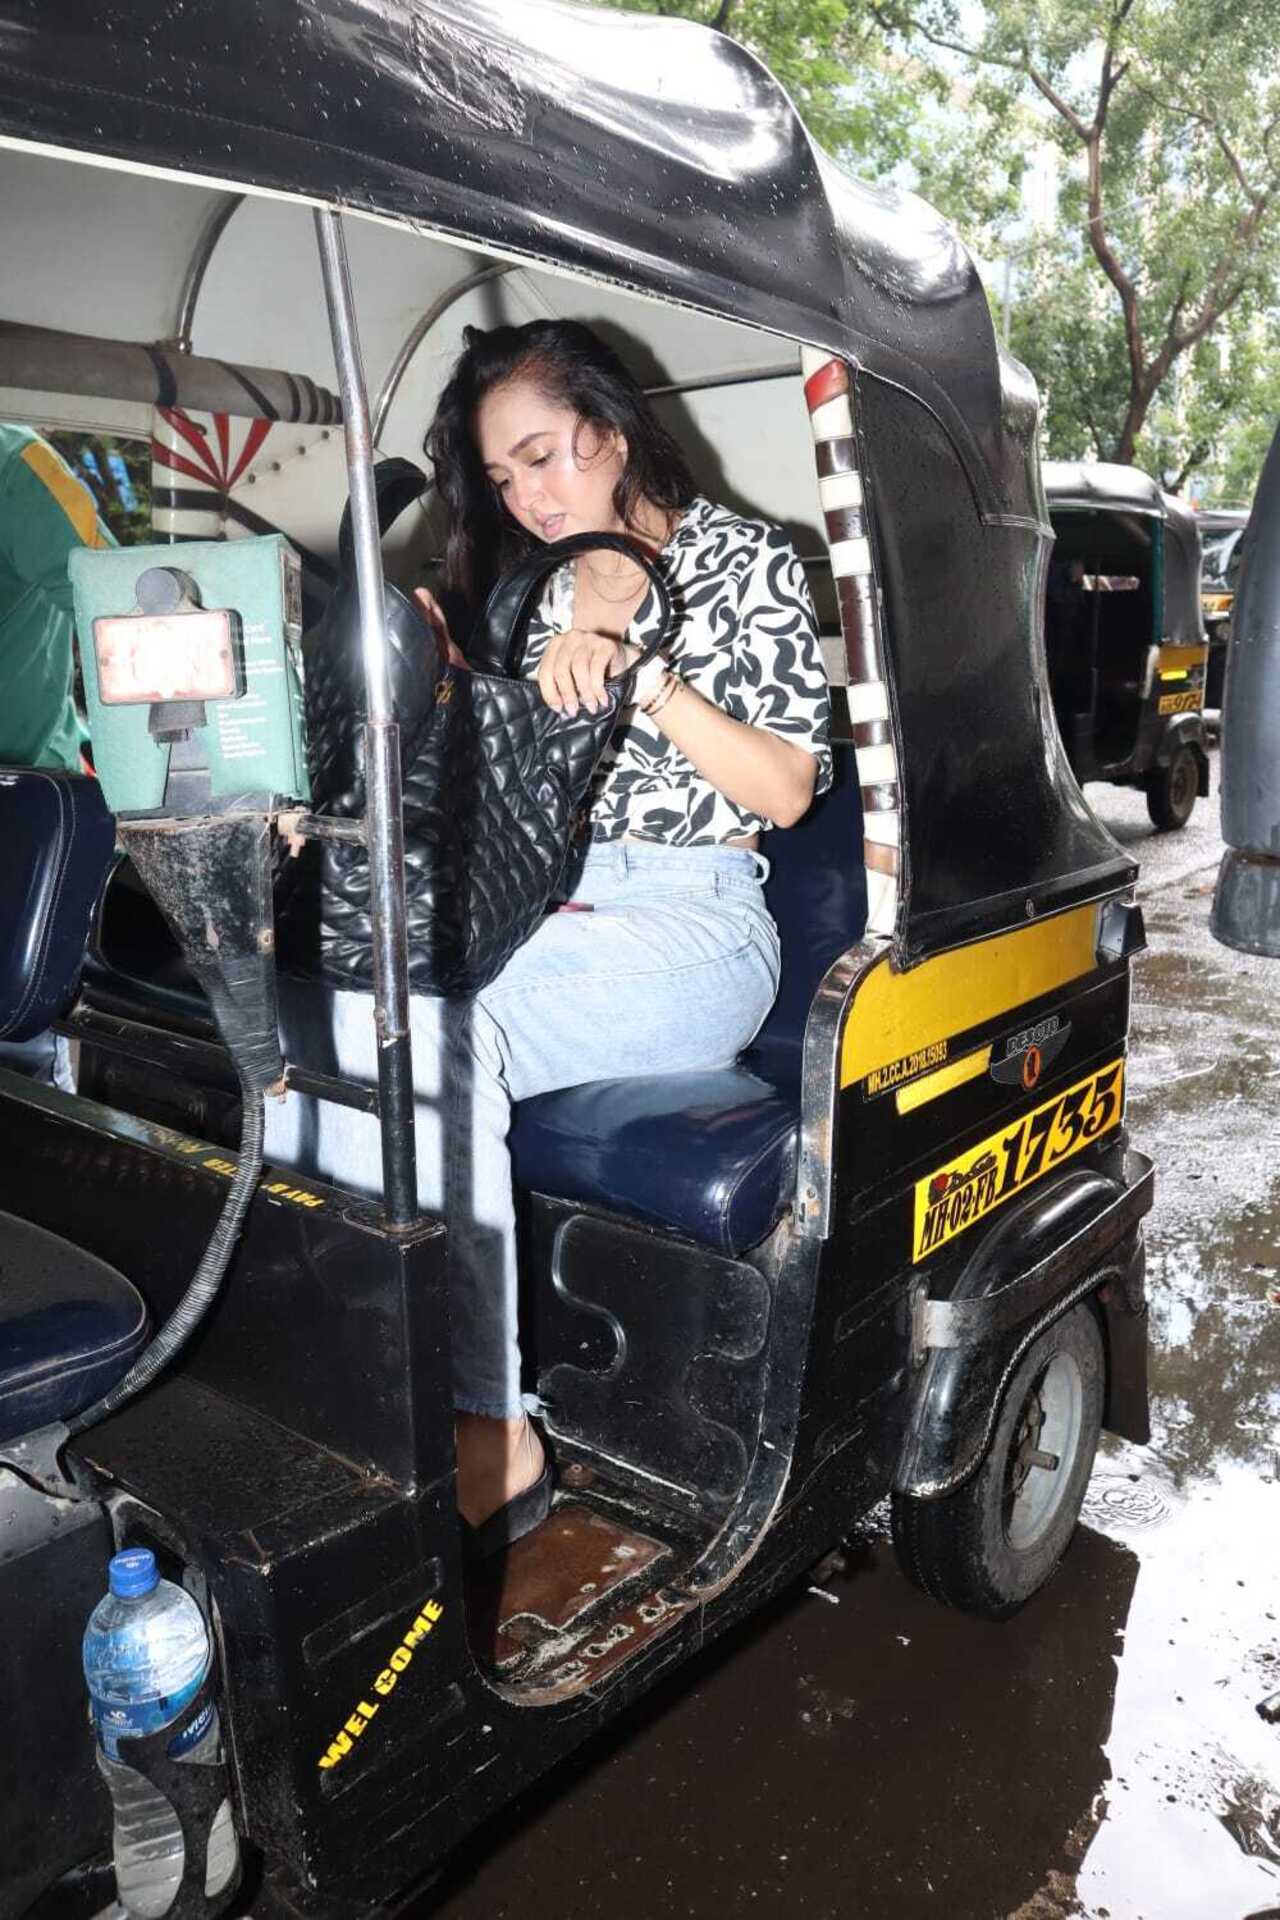 Tejasswi Prakash took a rickshaw ride as she was clicked in the city